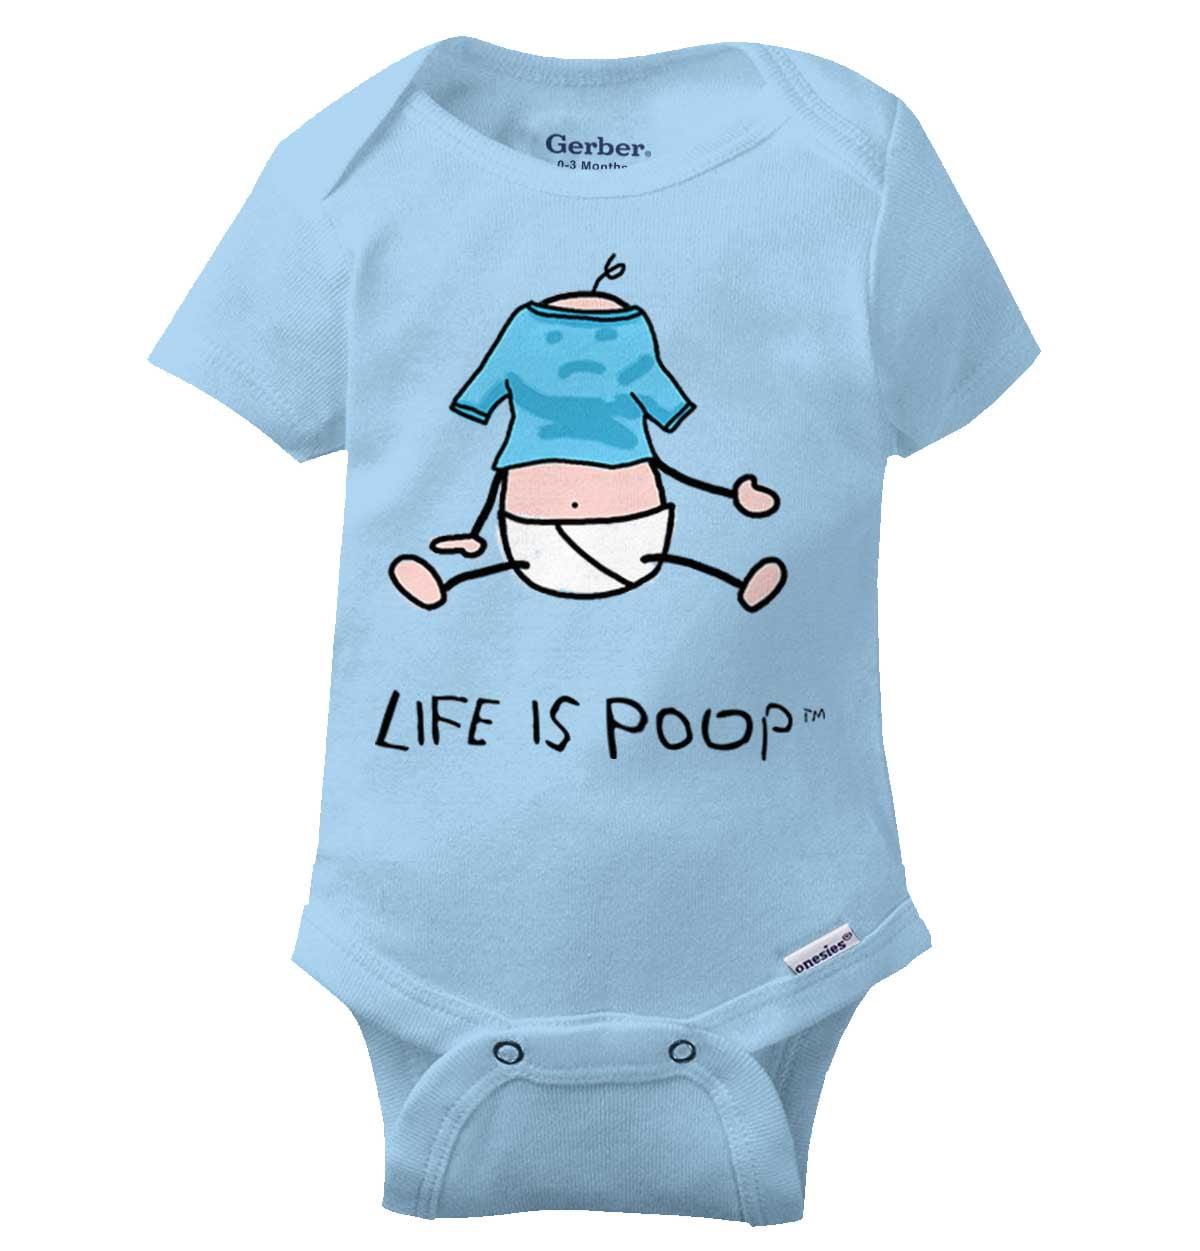 There It Is Funny Novelty Infant Baby Bodysuit One Piece Romper Cute Gift Poop 